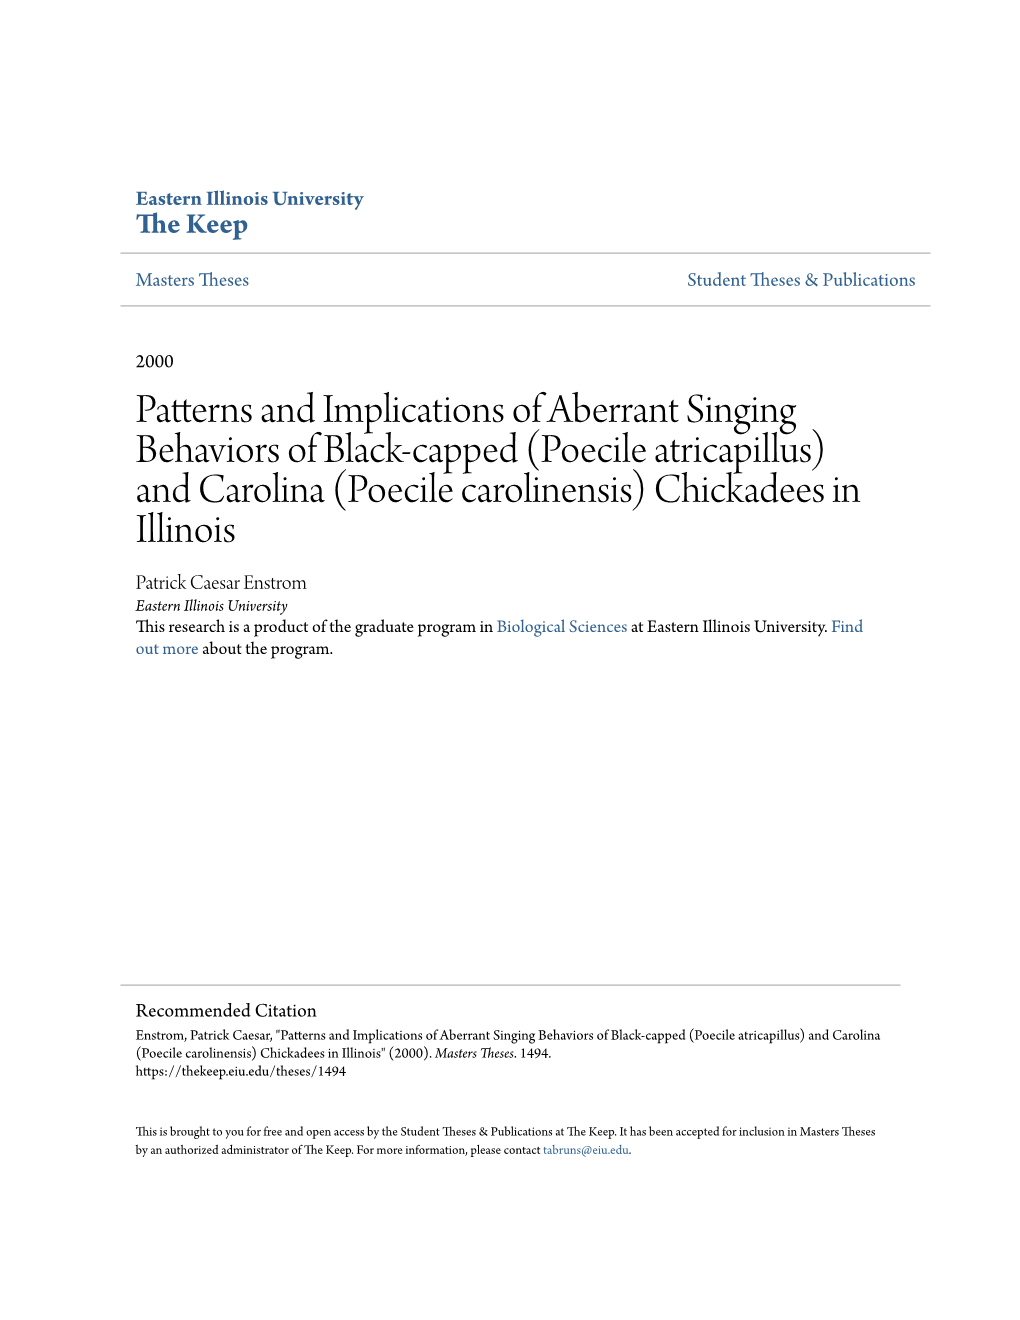 Patterns and Implications of Aberrant Singing Behaviors of Black-Capped